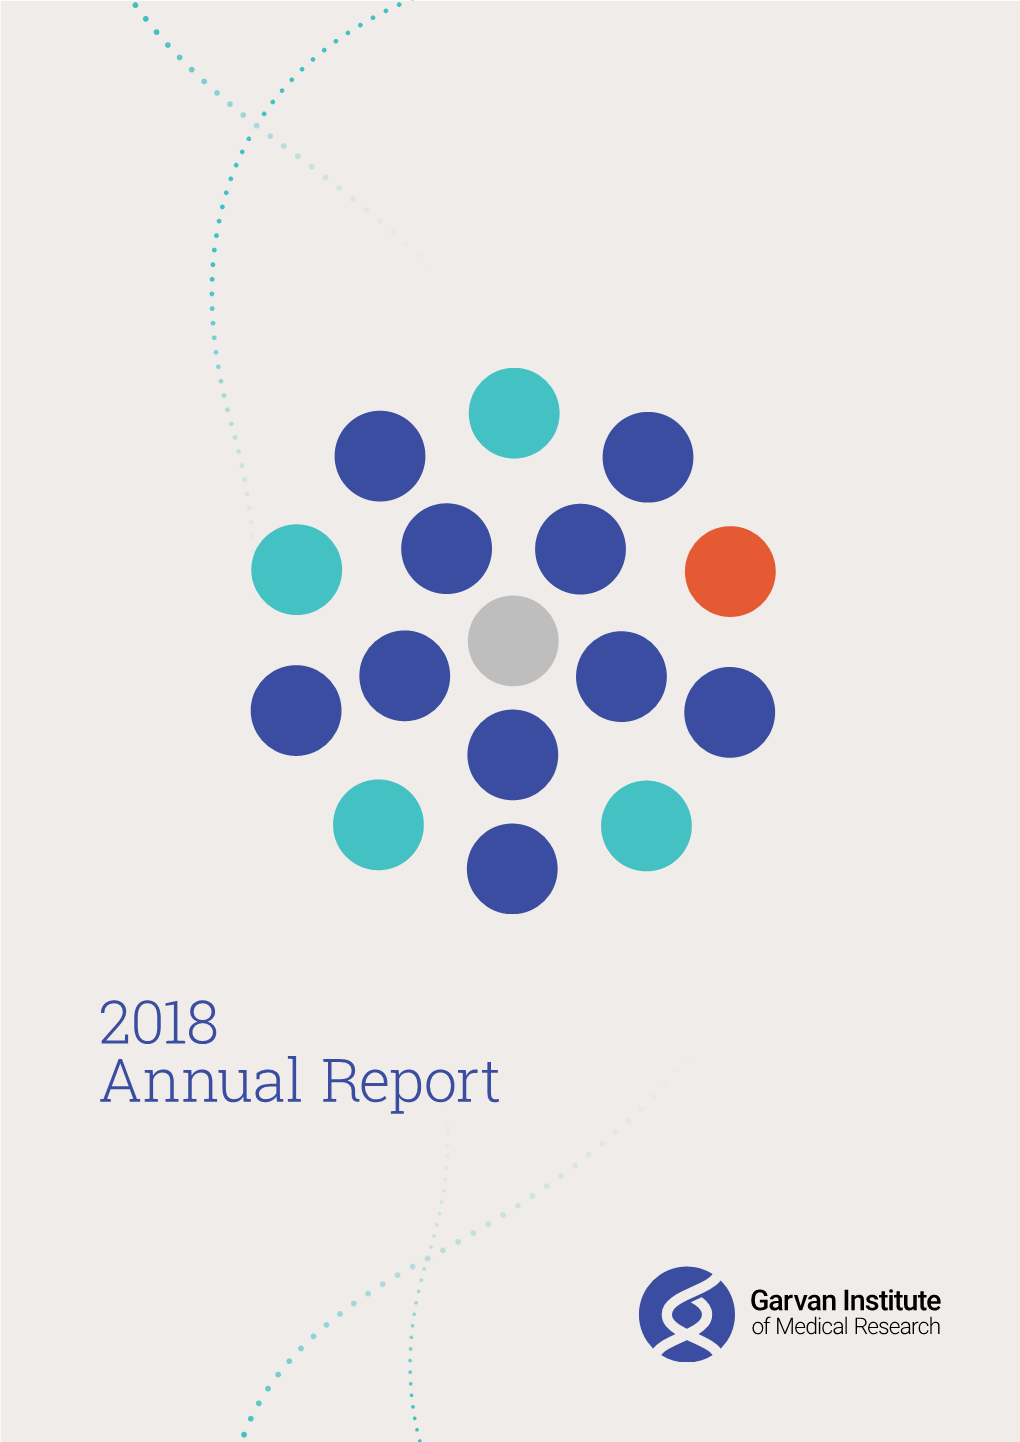 2018 Annual Report 2018 Our Year of Big Thinking, Collaboration and Discovery